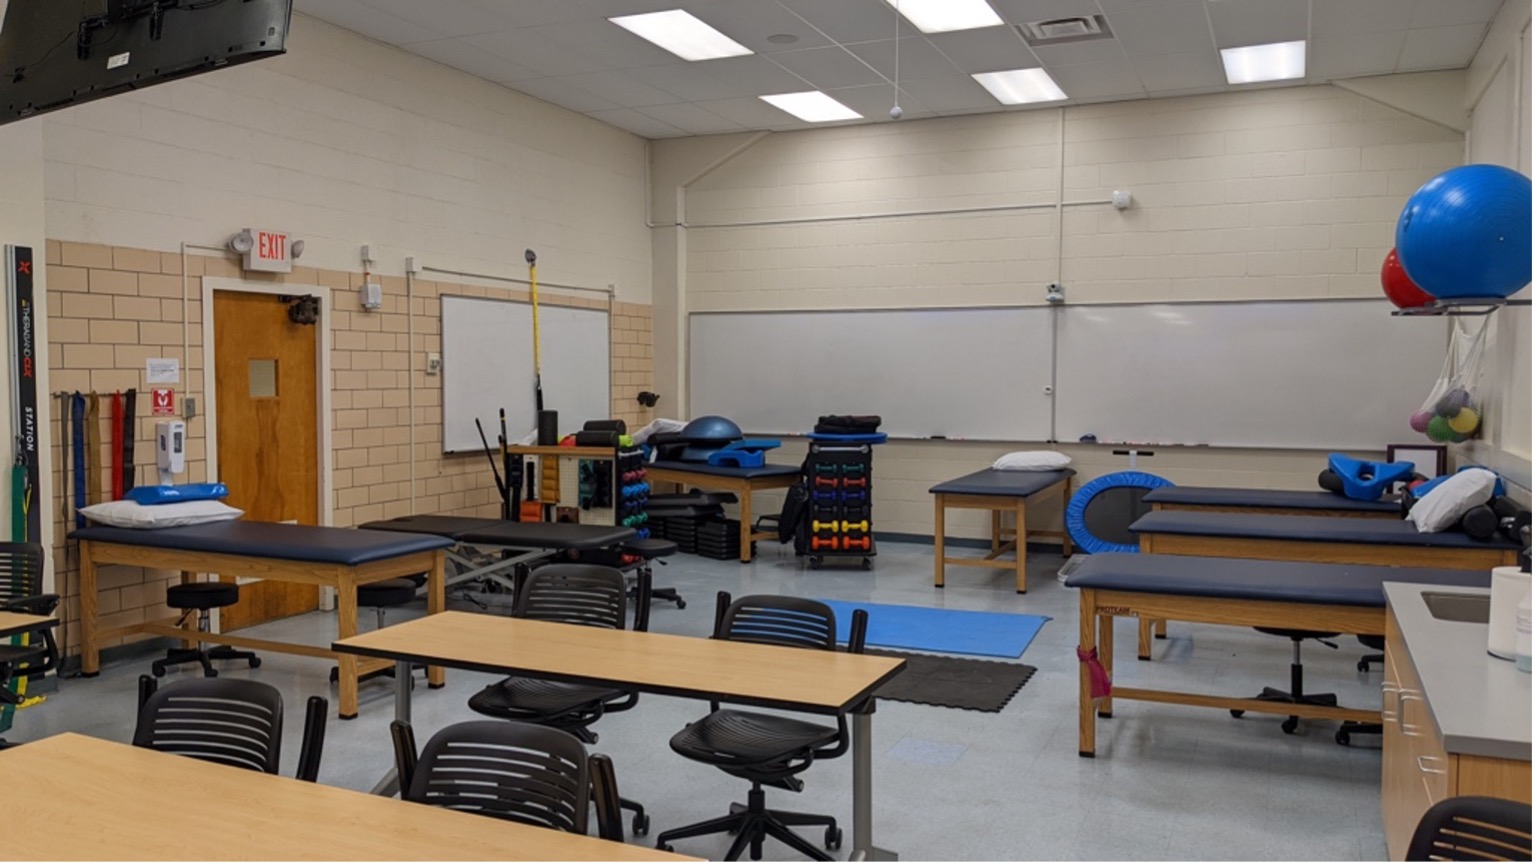 Athletic training program lab with exercise tables, weights, yoga balls, and exercise equipment